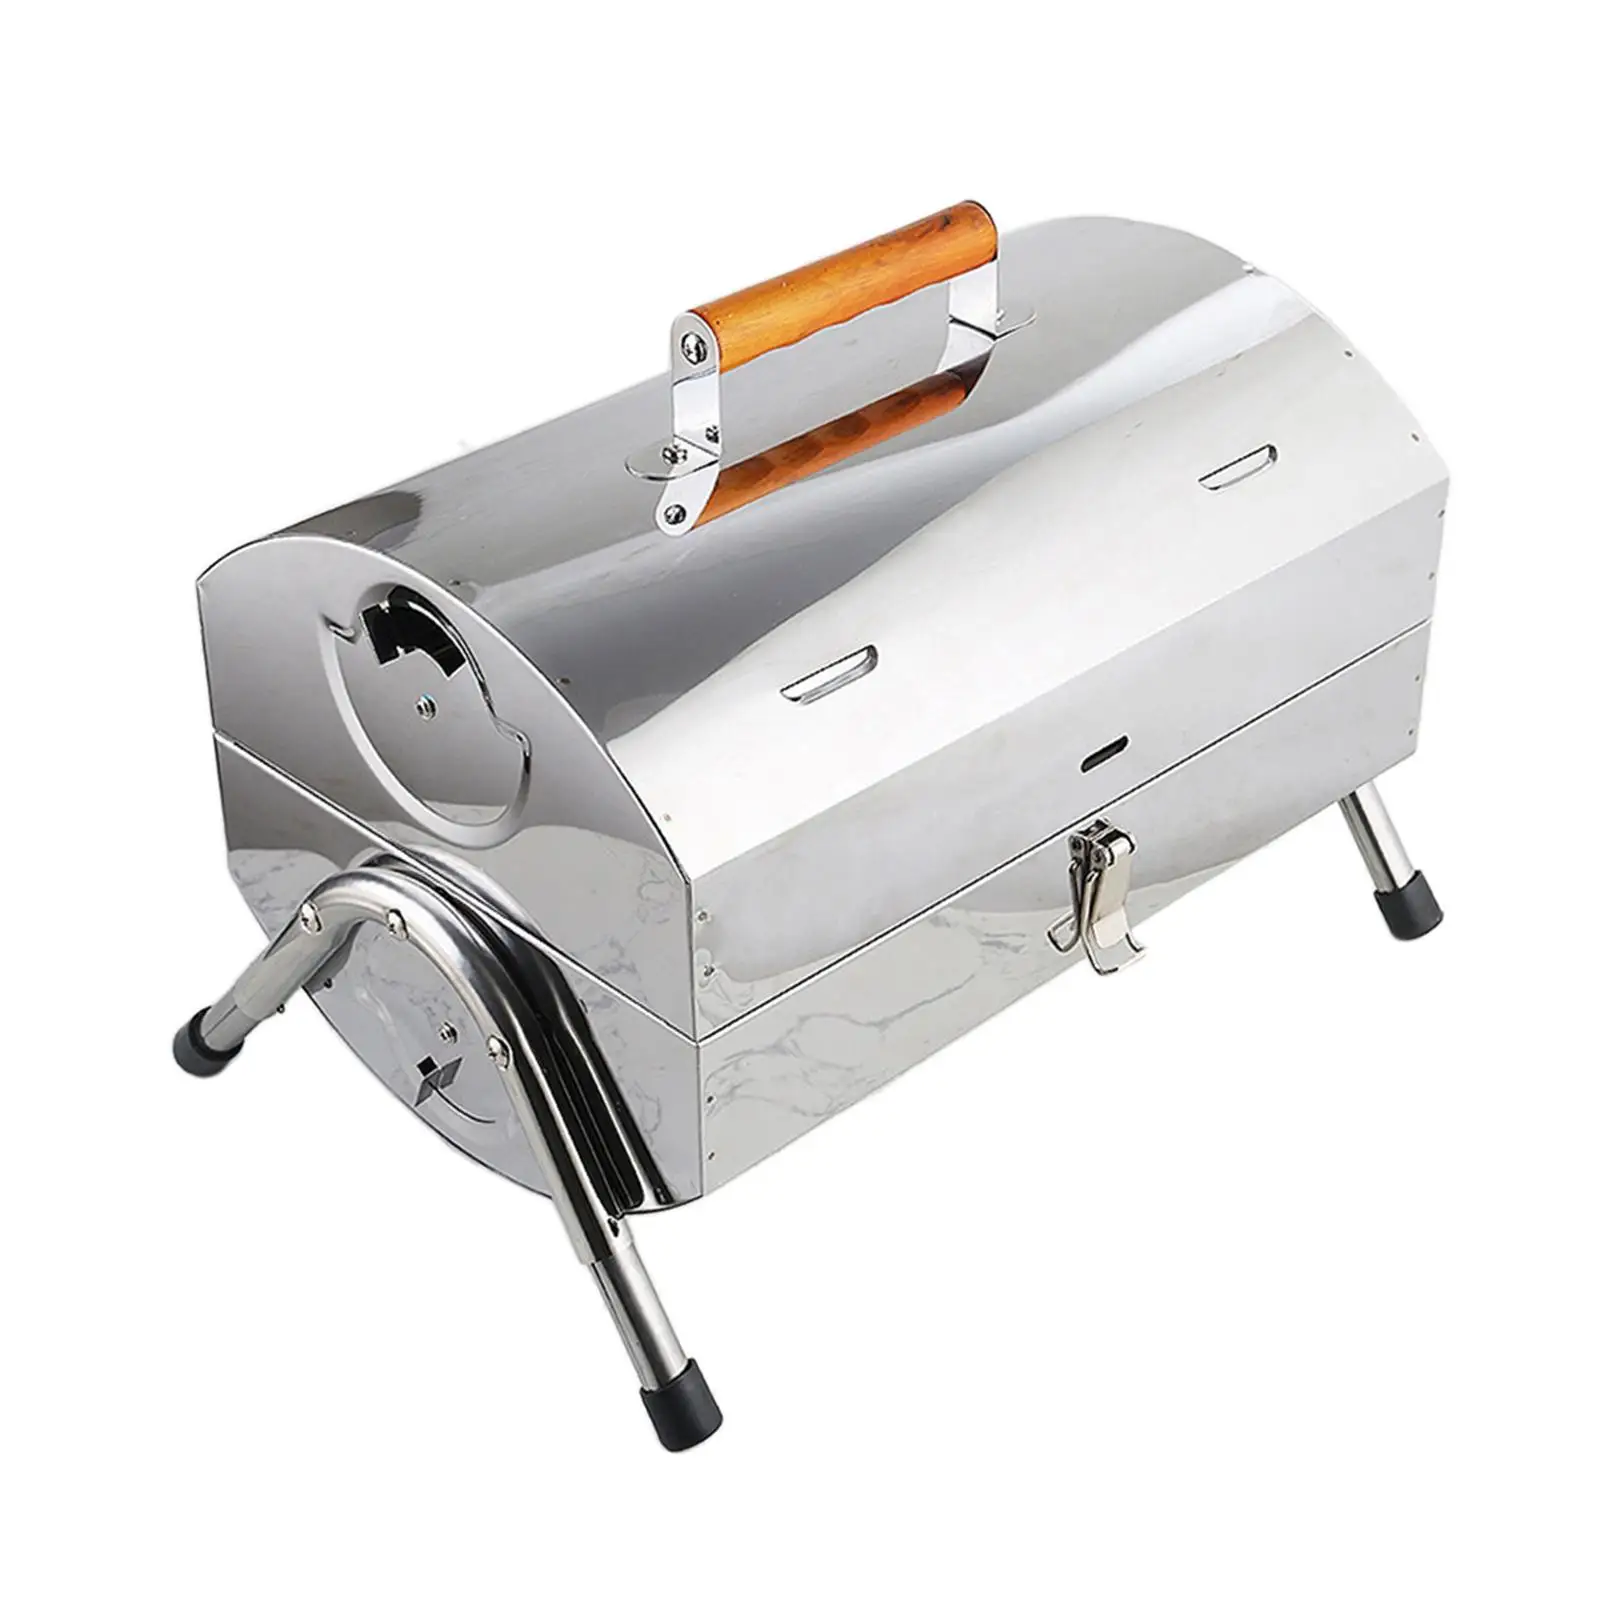 Tabletop Charcoal Grill Household Grilling Meat Multifunctional Mini Camping Grill for Beach RV Traveling Garden Hiking Backyard